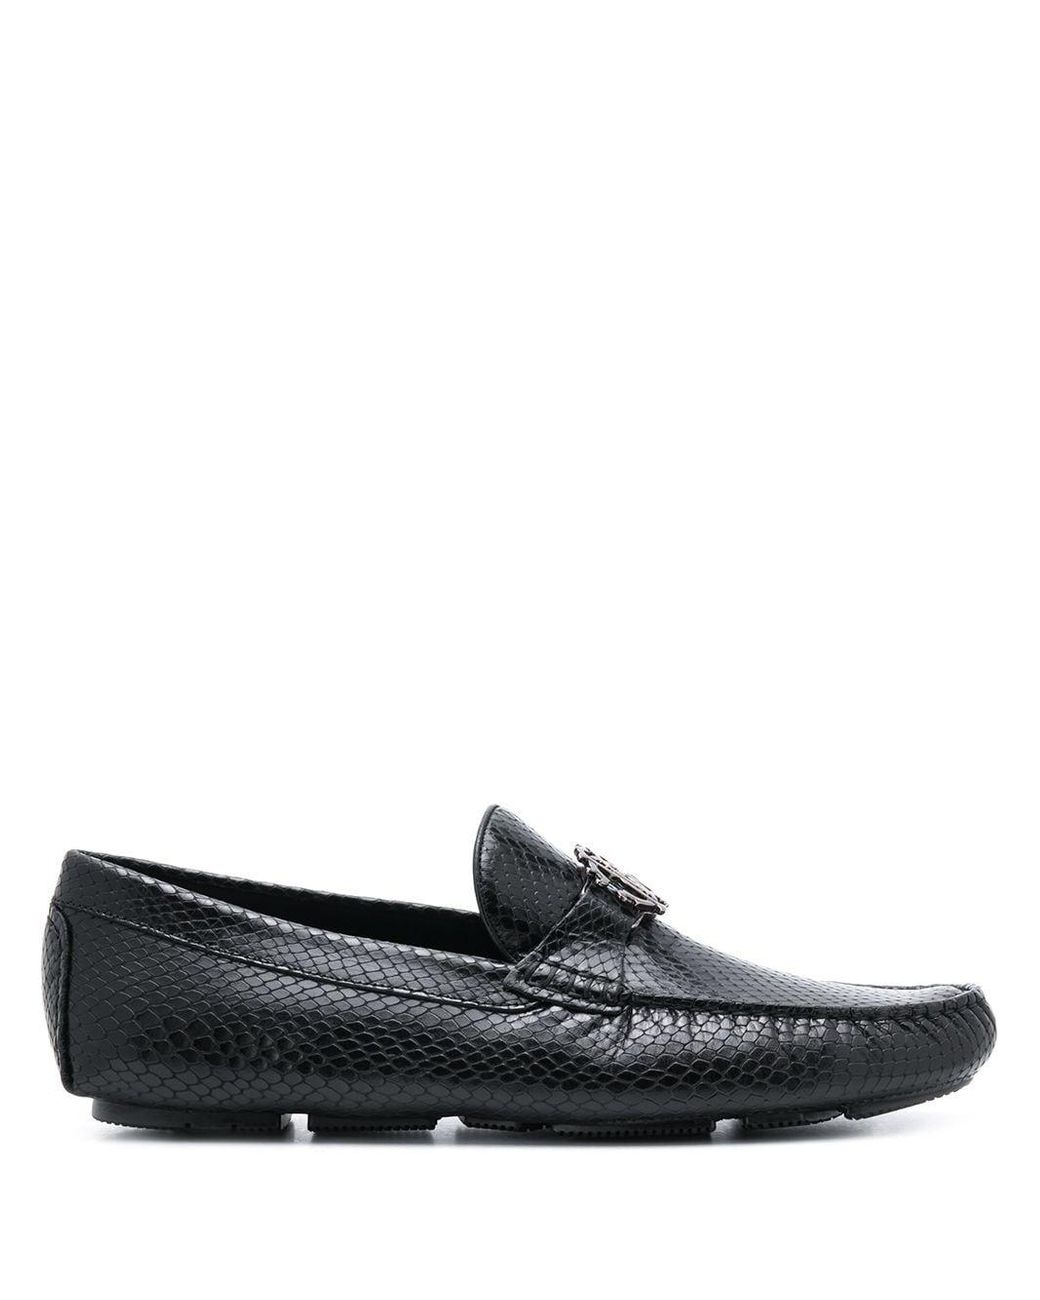 Roberto Cavalli Leather Rc Monogram Snake Loafers in Black for Men - Lyst